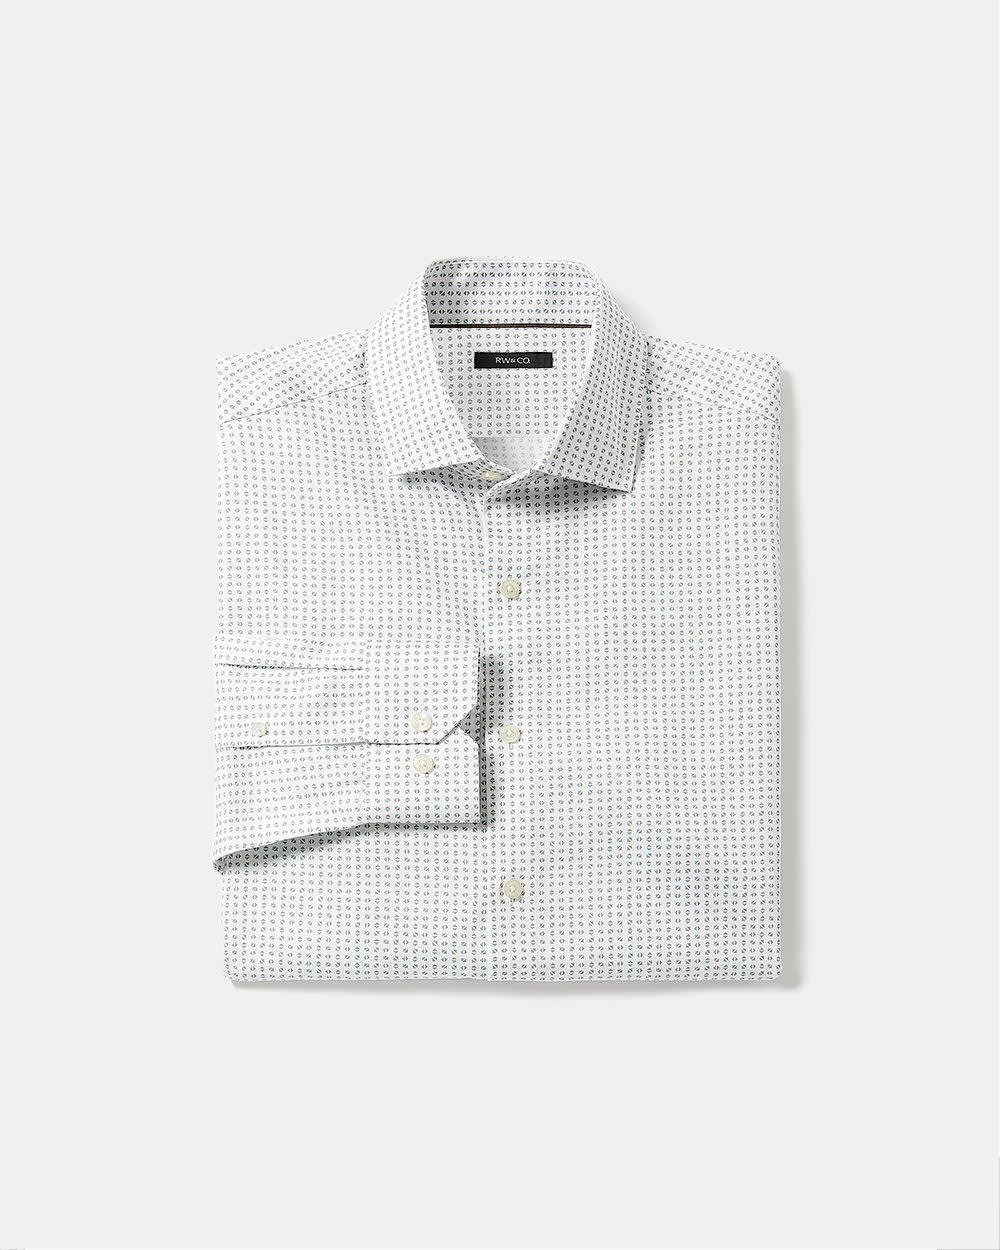 Where can I find this (or similar) RW&CO shirt that was discontinued :  r/findfashion